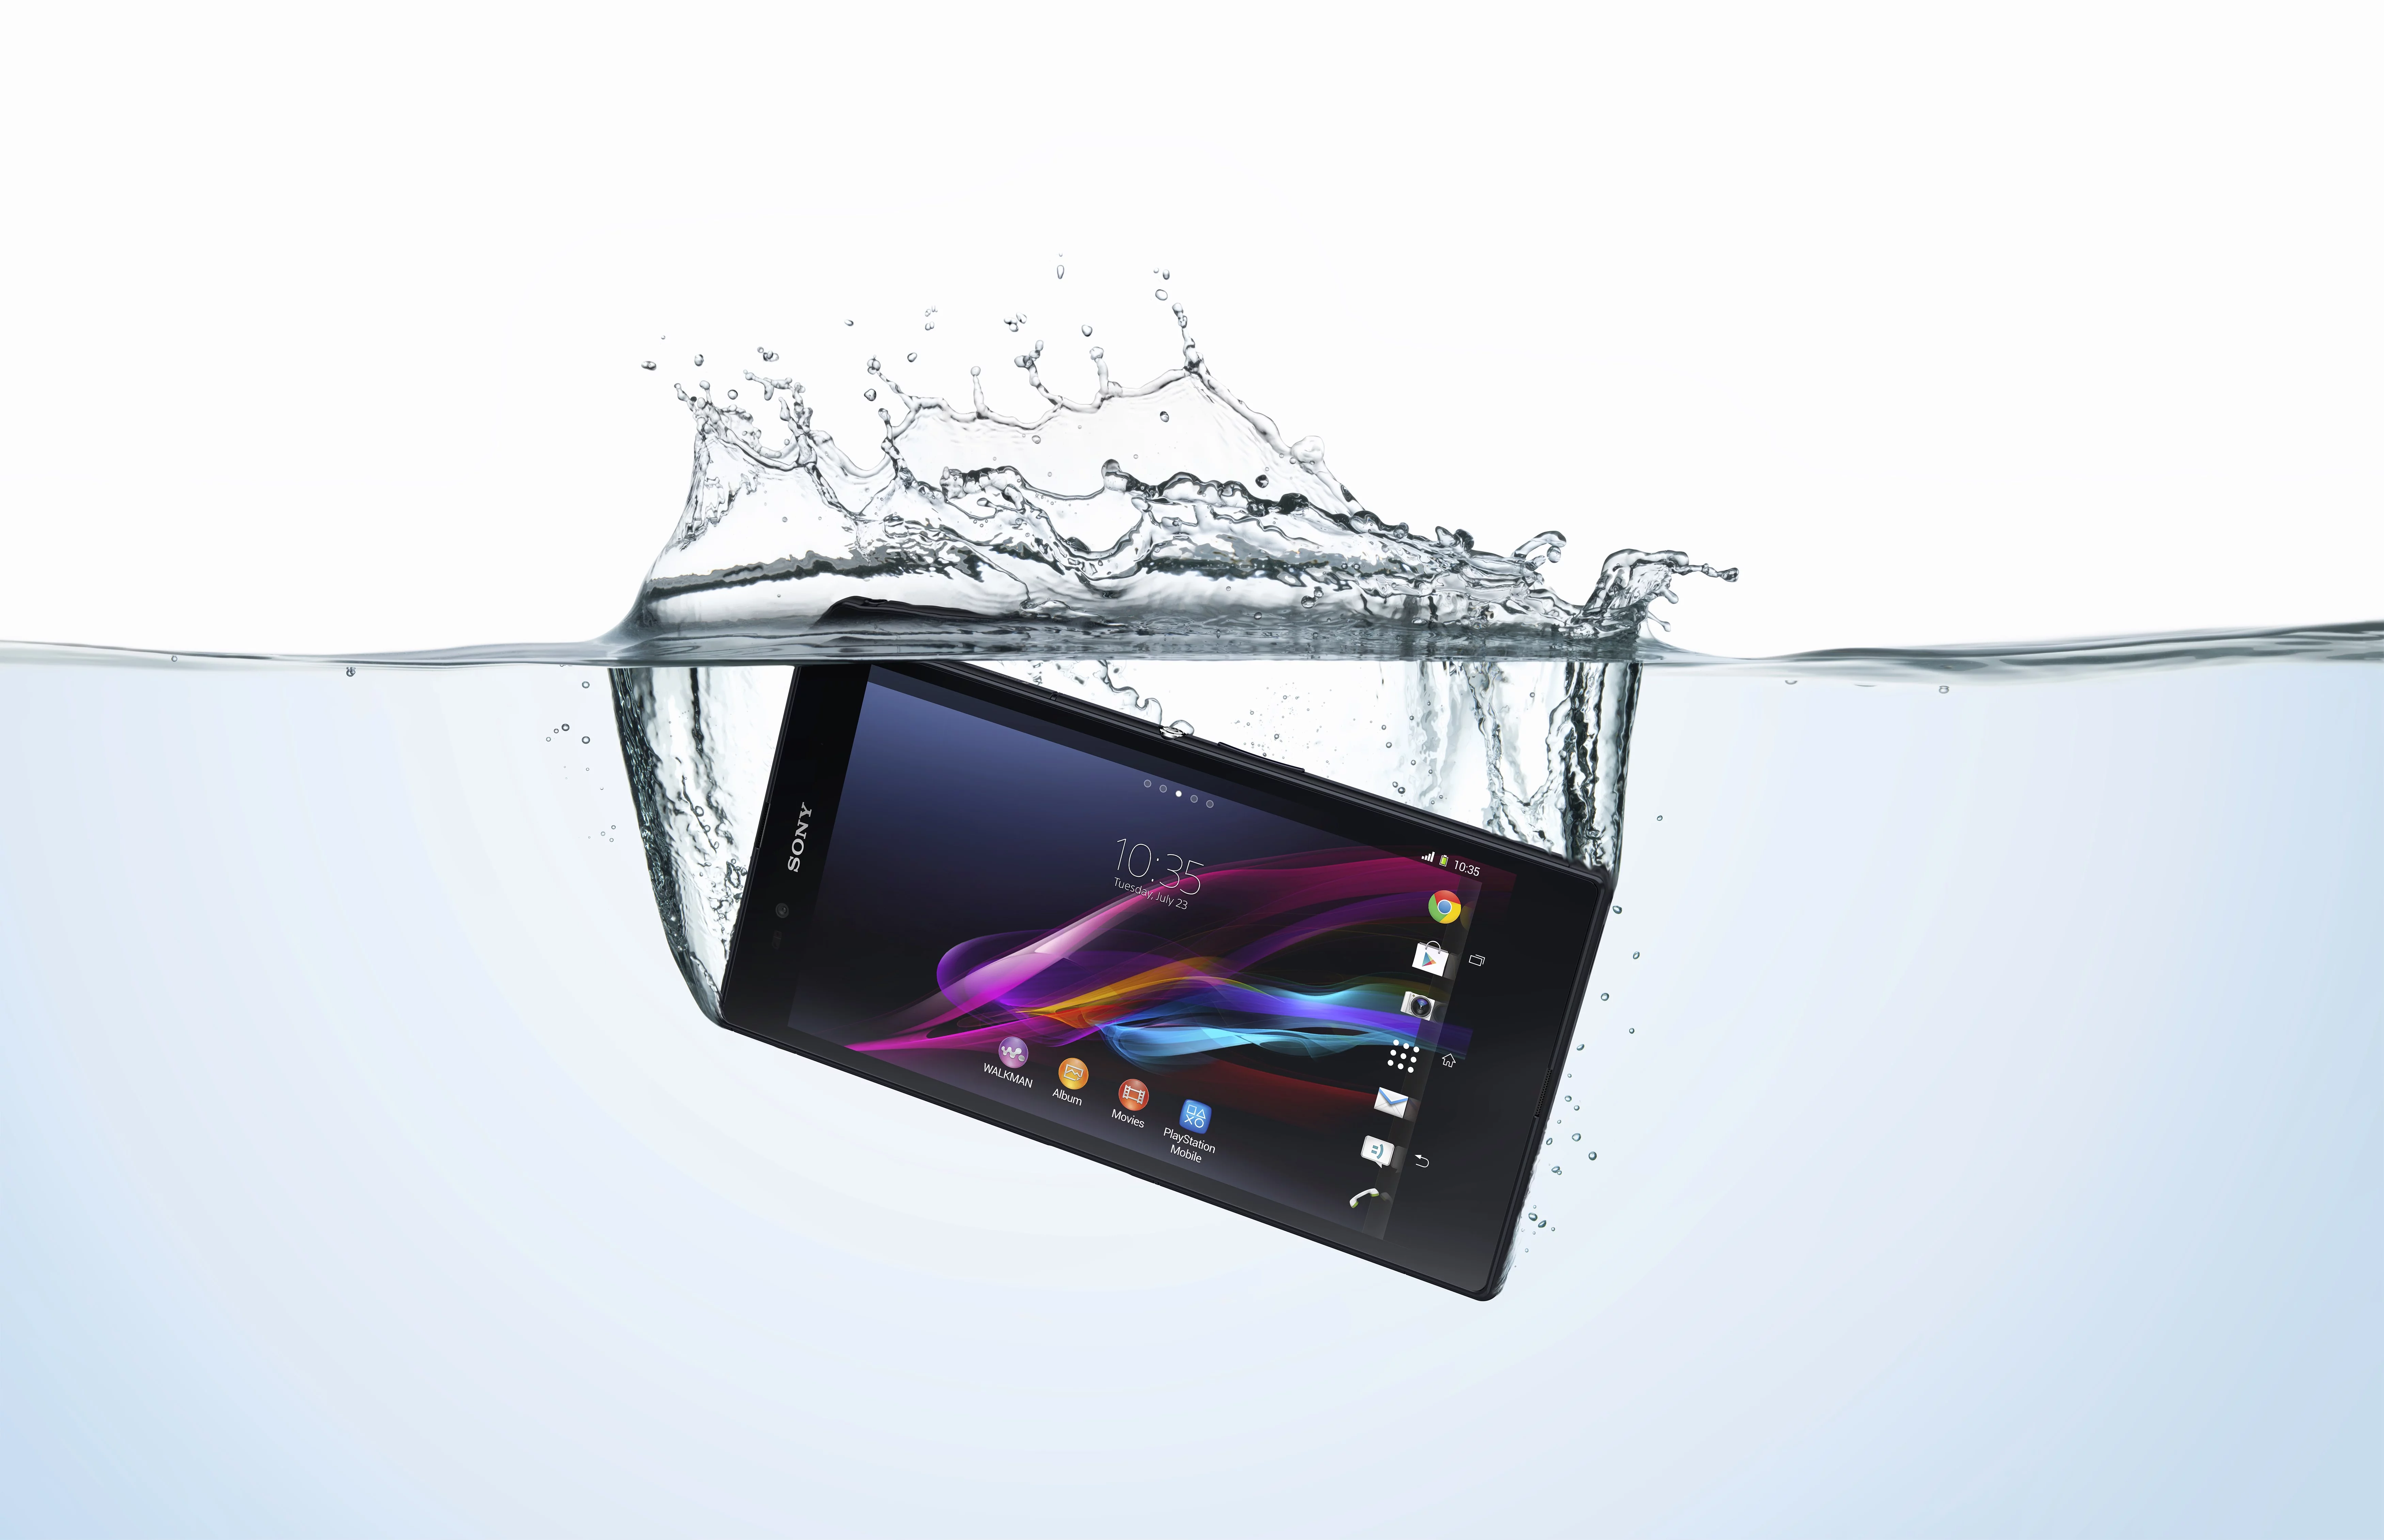 18 Xperia Z Ultra Water Horiz - for some reason we don't have an alt tag here